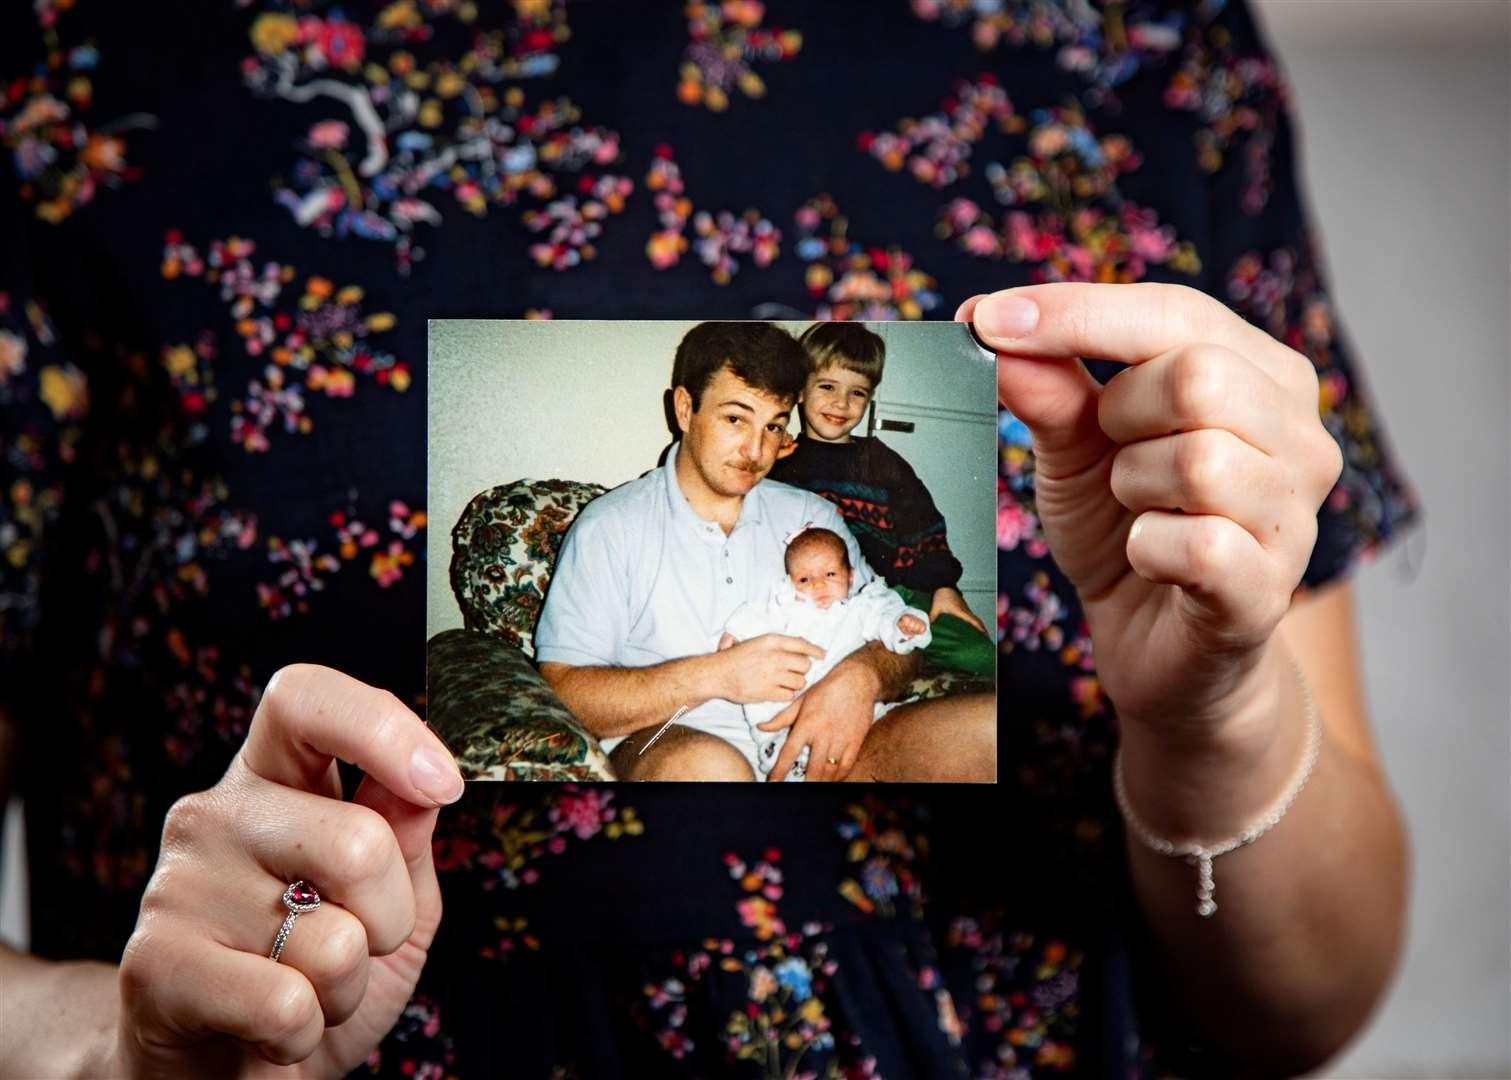 Stephanie holding up a photo of her as a baby being held by Mark, who would have been 27 at the time. Picture: SWNS